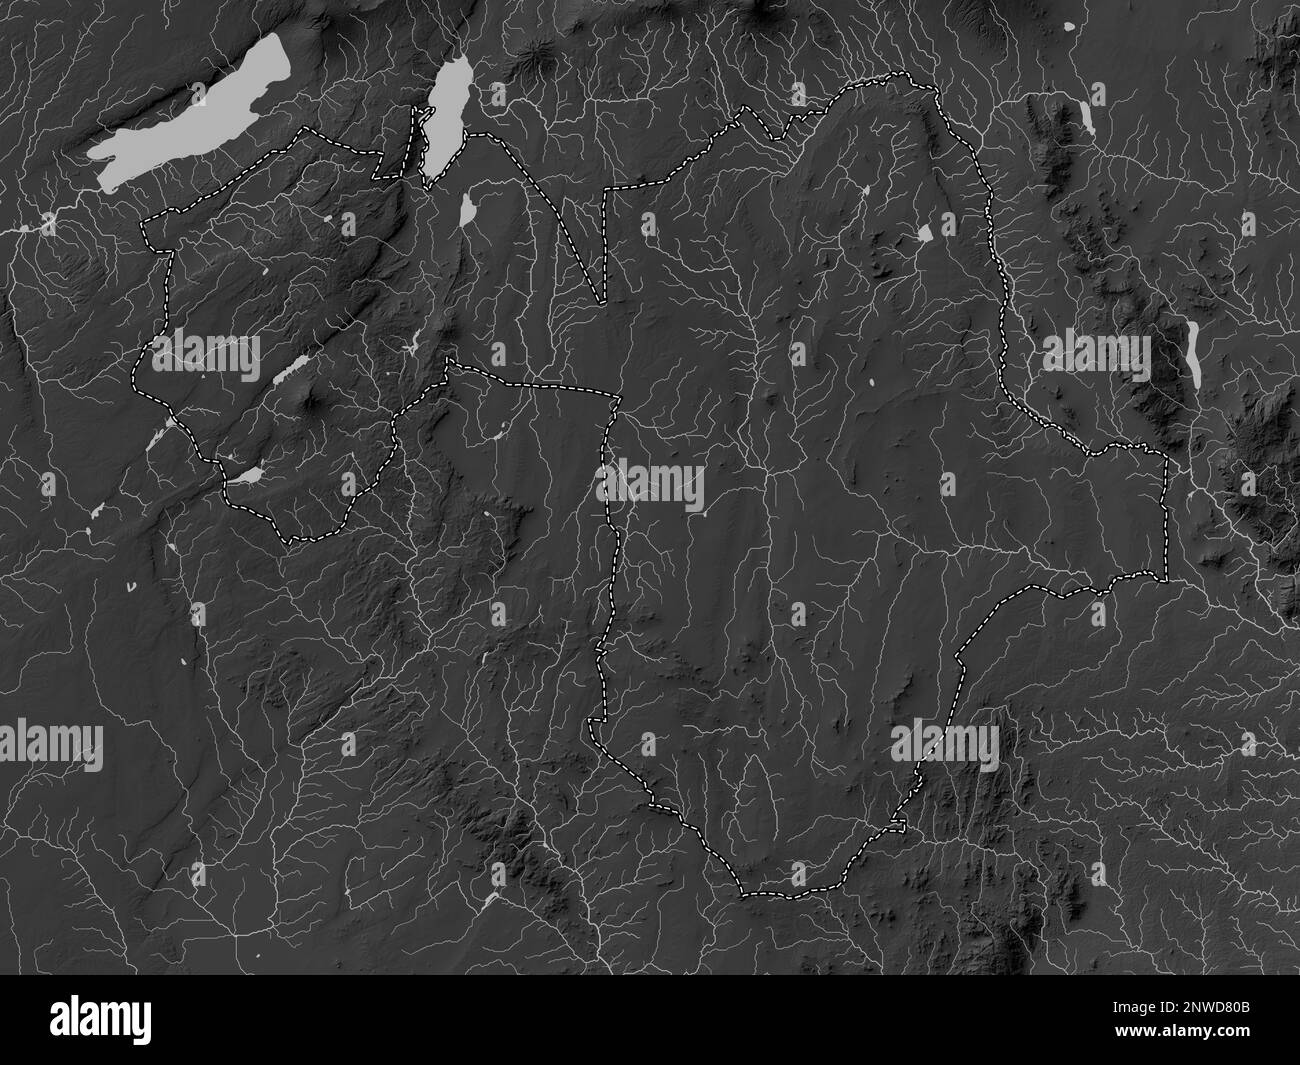 Manyara, region of Tanzania. Grayscale elevation map with lakes and rivers Stock Photo